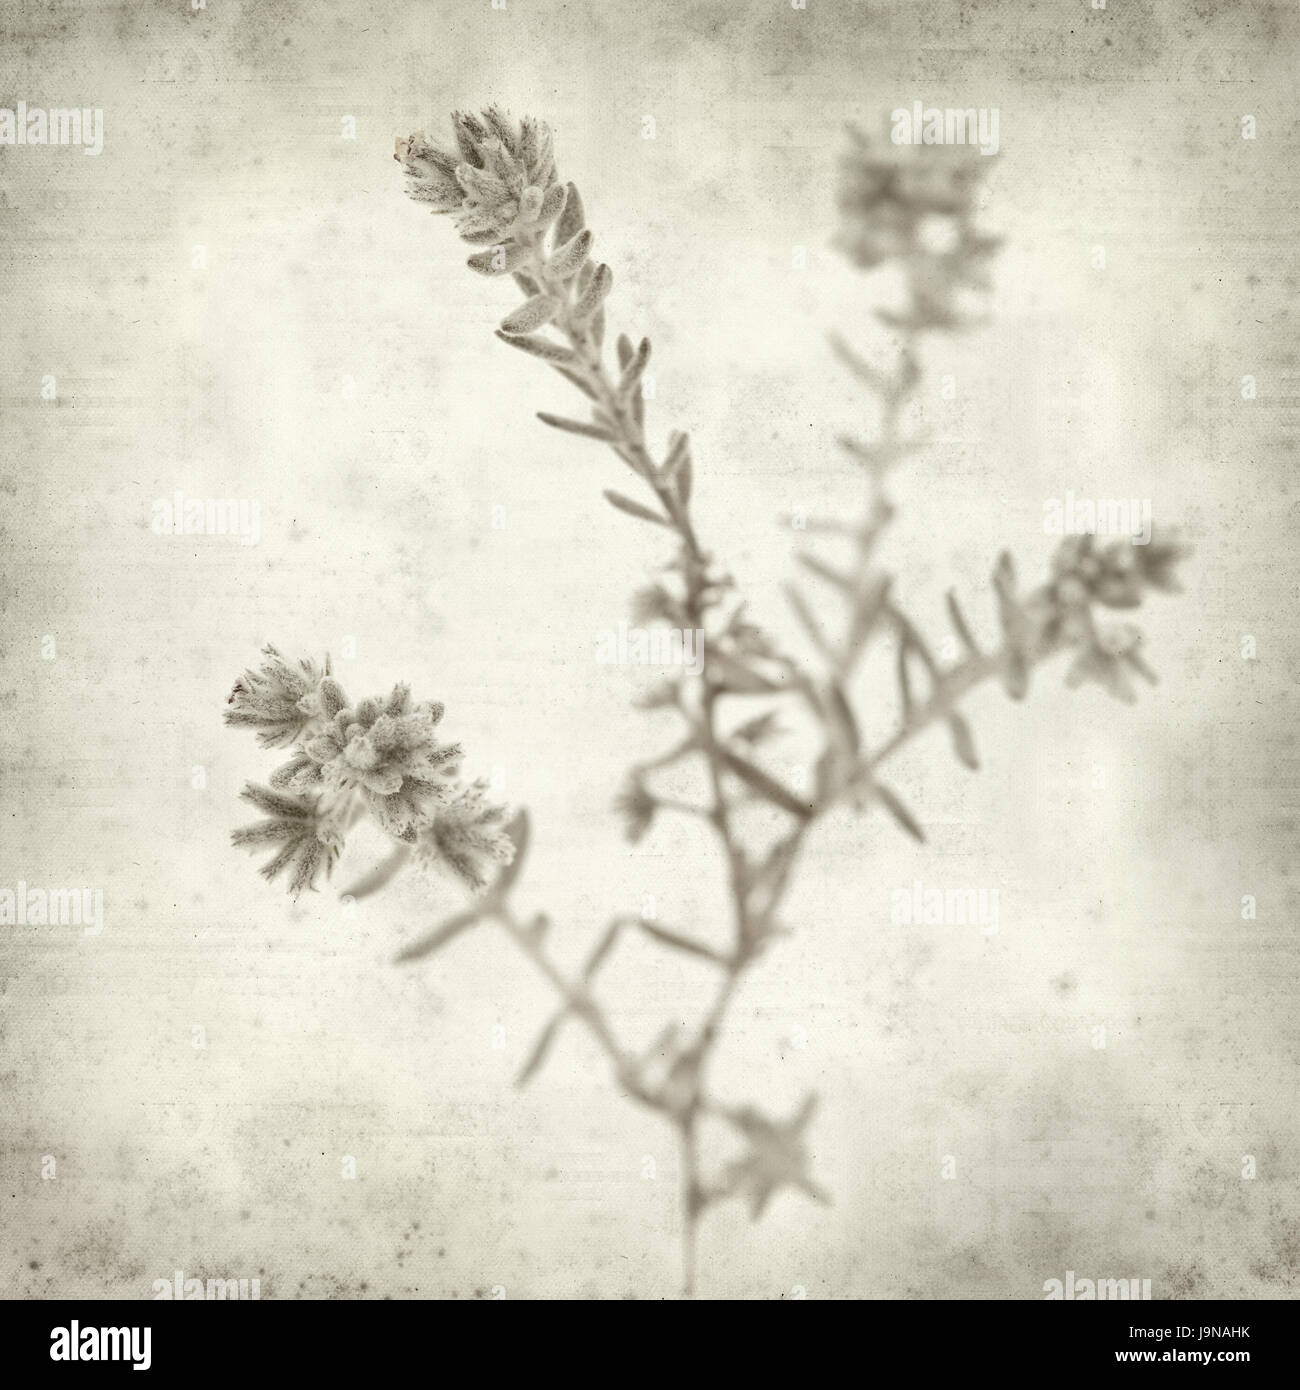 textured old paper background with Micromeria plant Stock Photo